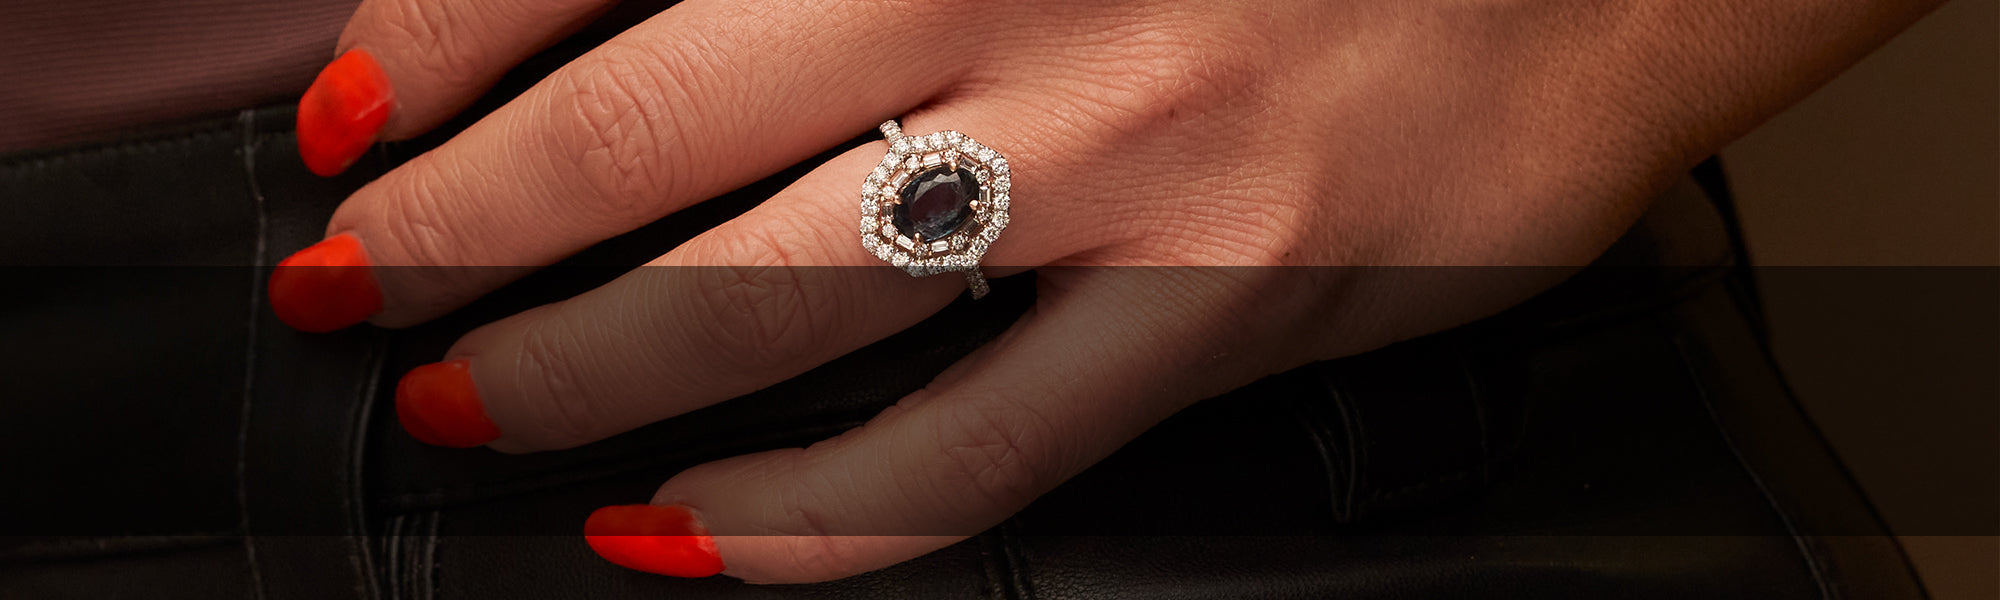 Woman Wearing Alexandrite Ring with a Diamond Halo from Park City Jewelers